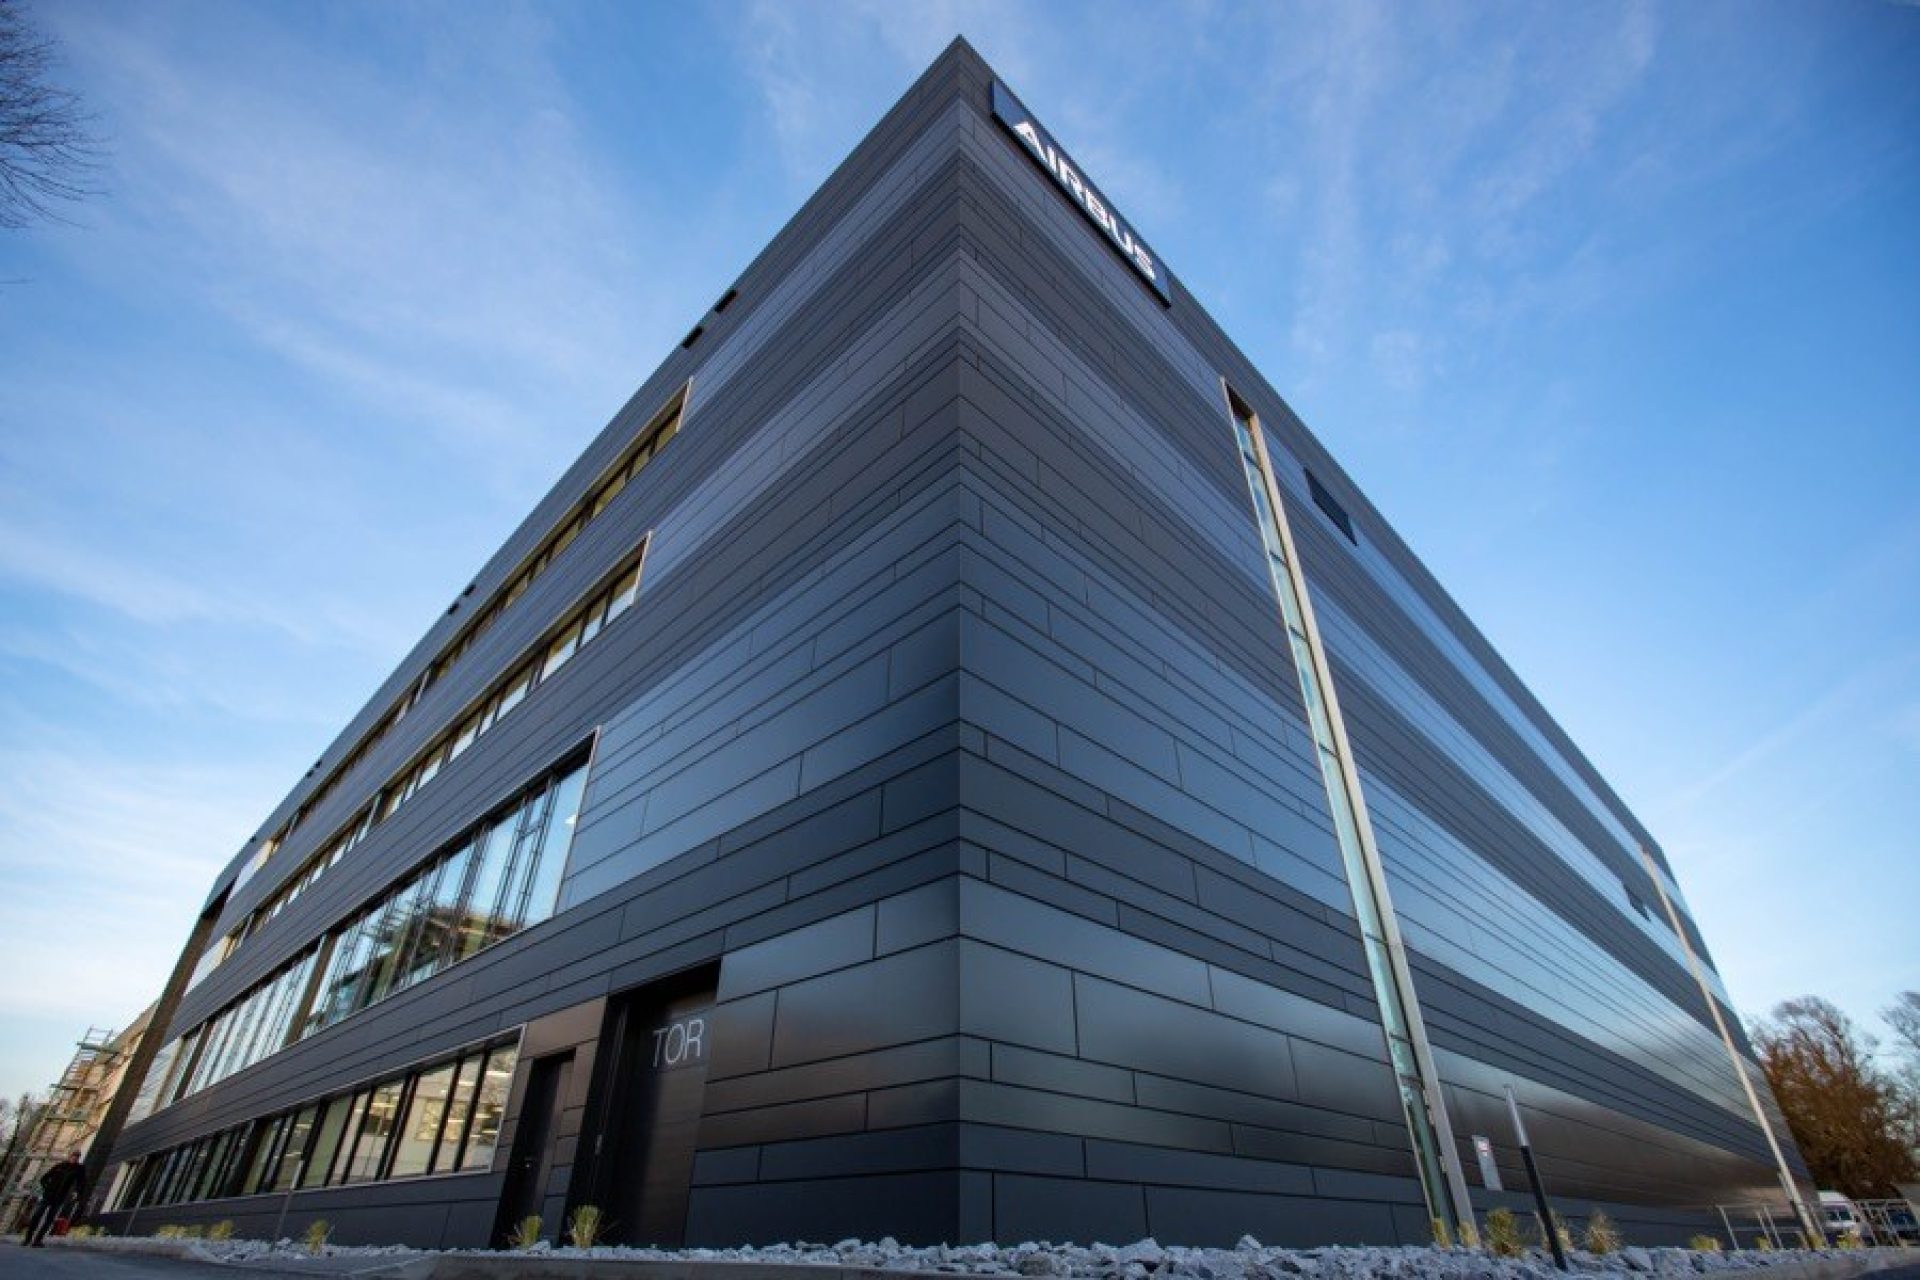 Neubau Integrated Technology Center Airbus Immenstaad62